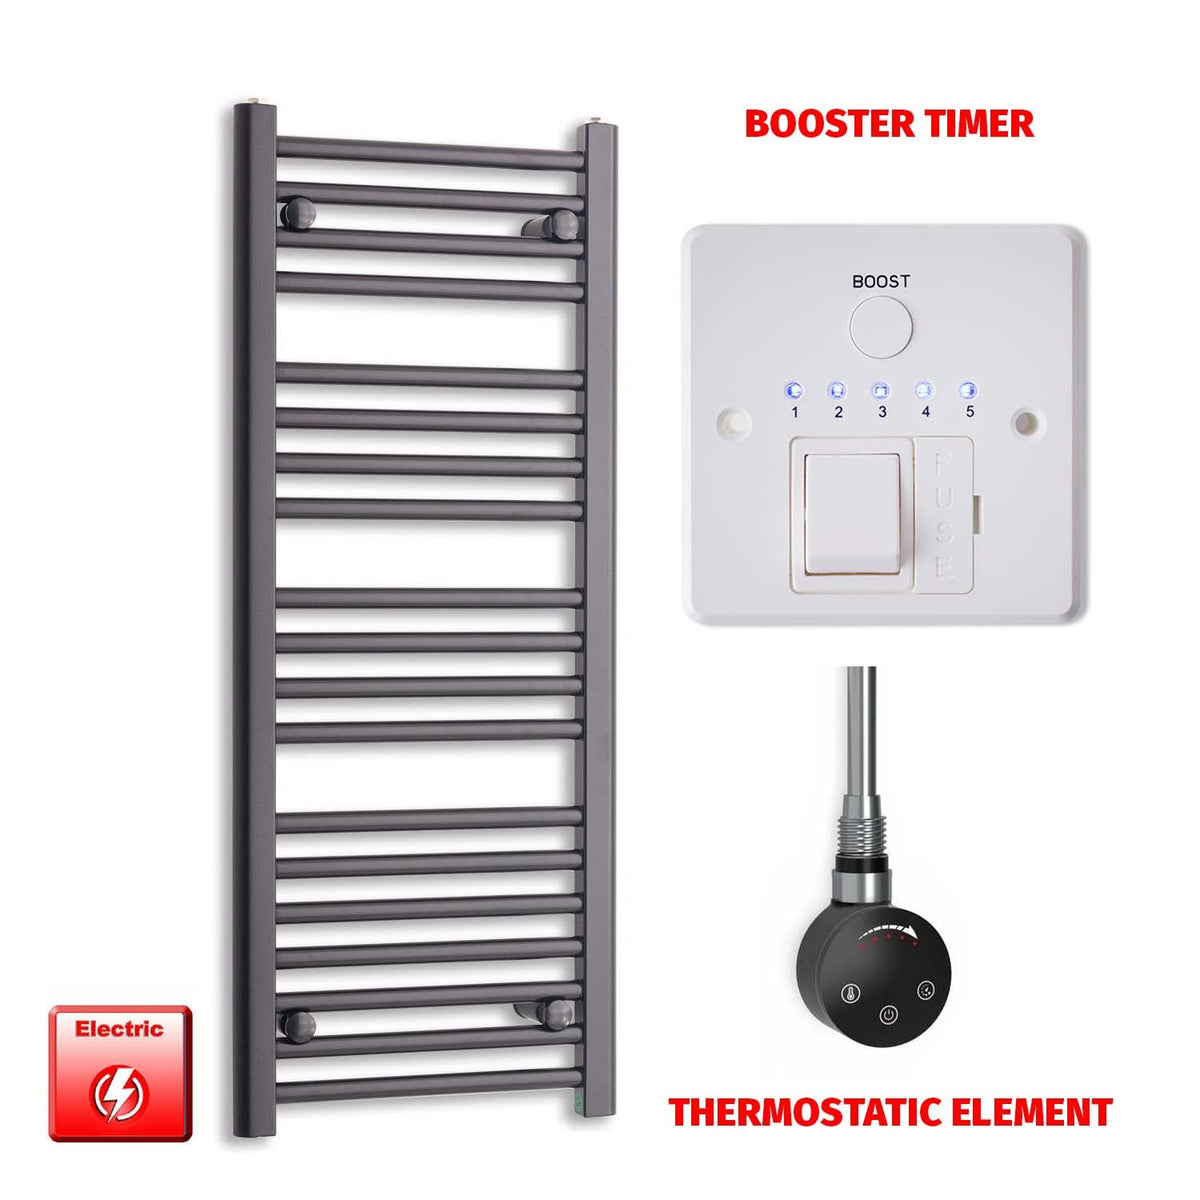 1000mm High 450mm Wide High Flat Black Pre-Filled Electric Heated Towel Radiator HTR SMART Thermostatic Booster Timer